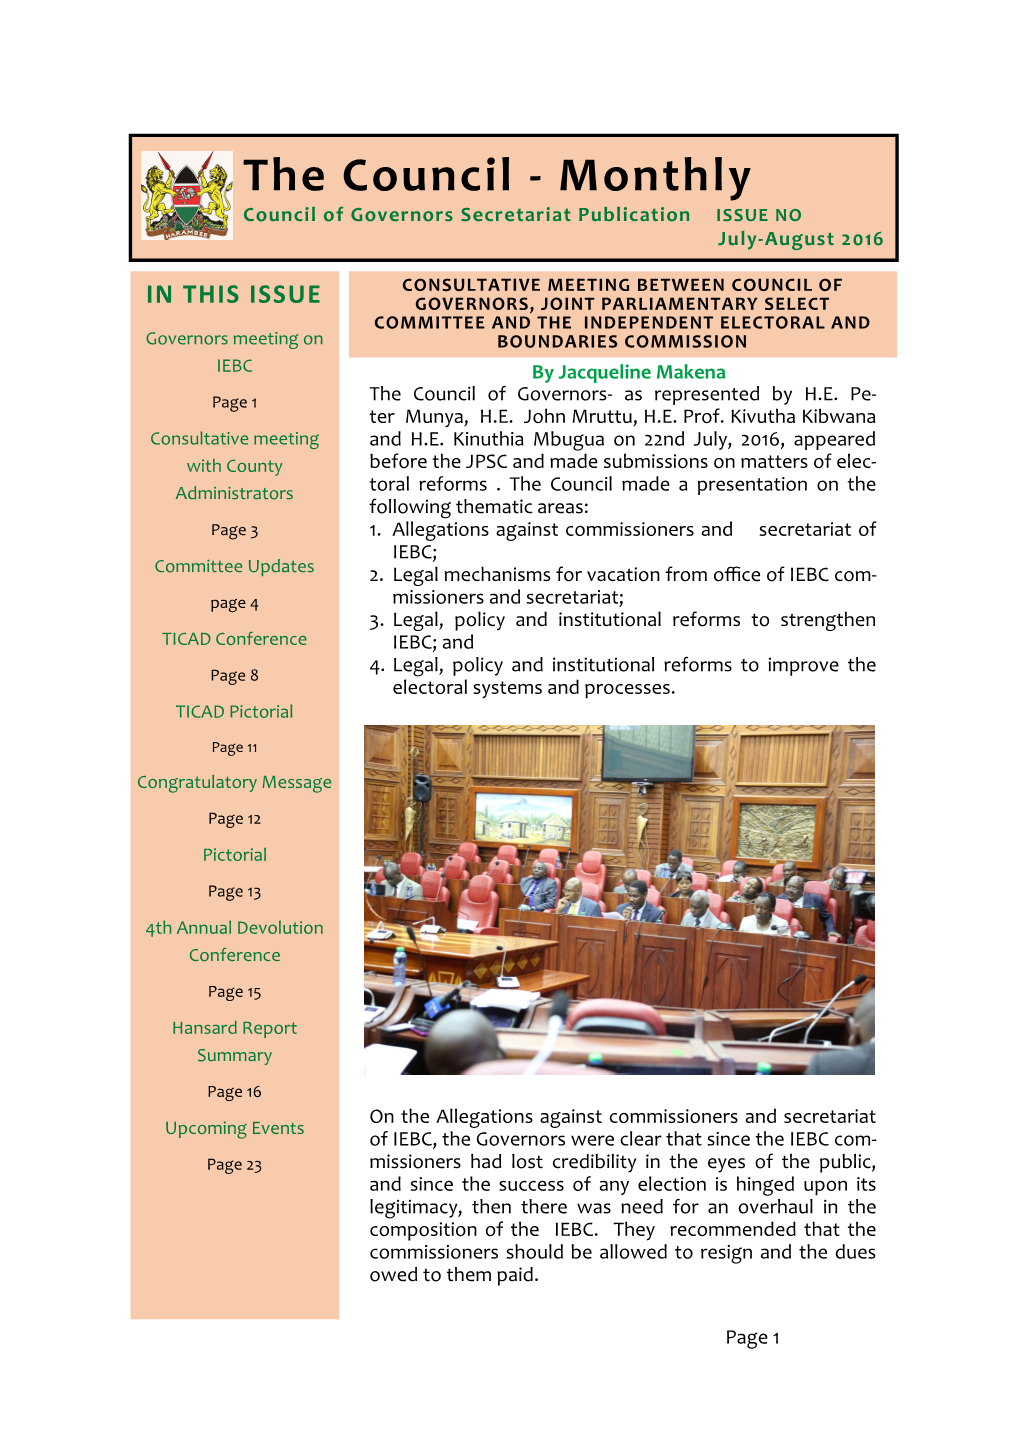 The Council - Monthly Council of Governors Secretariat Publication ISSUE NO July-August 2016